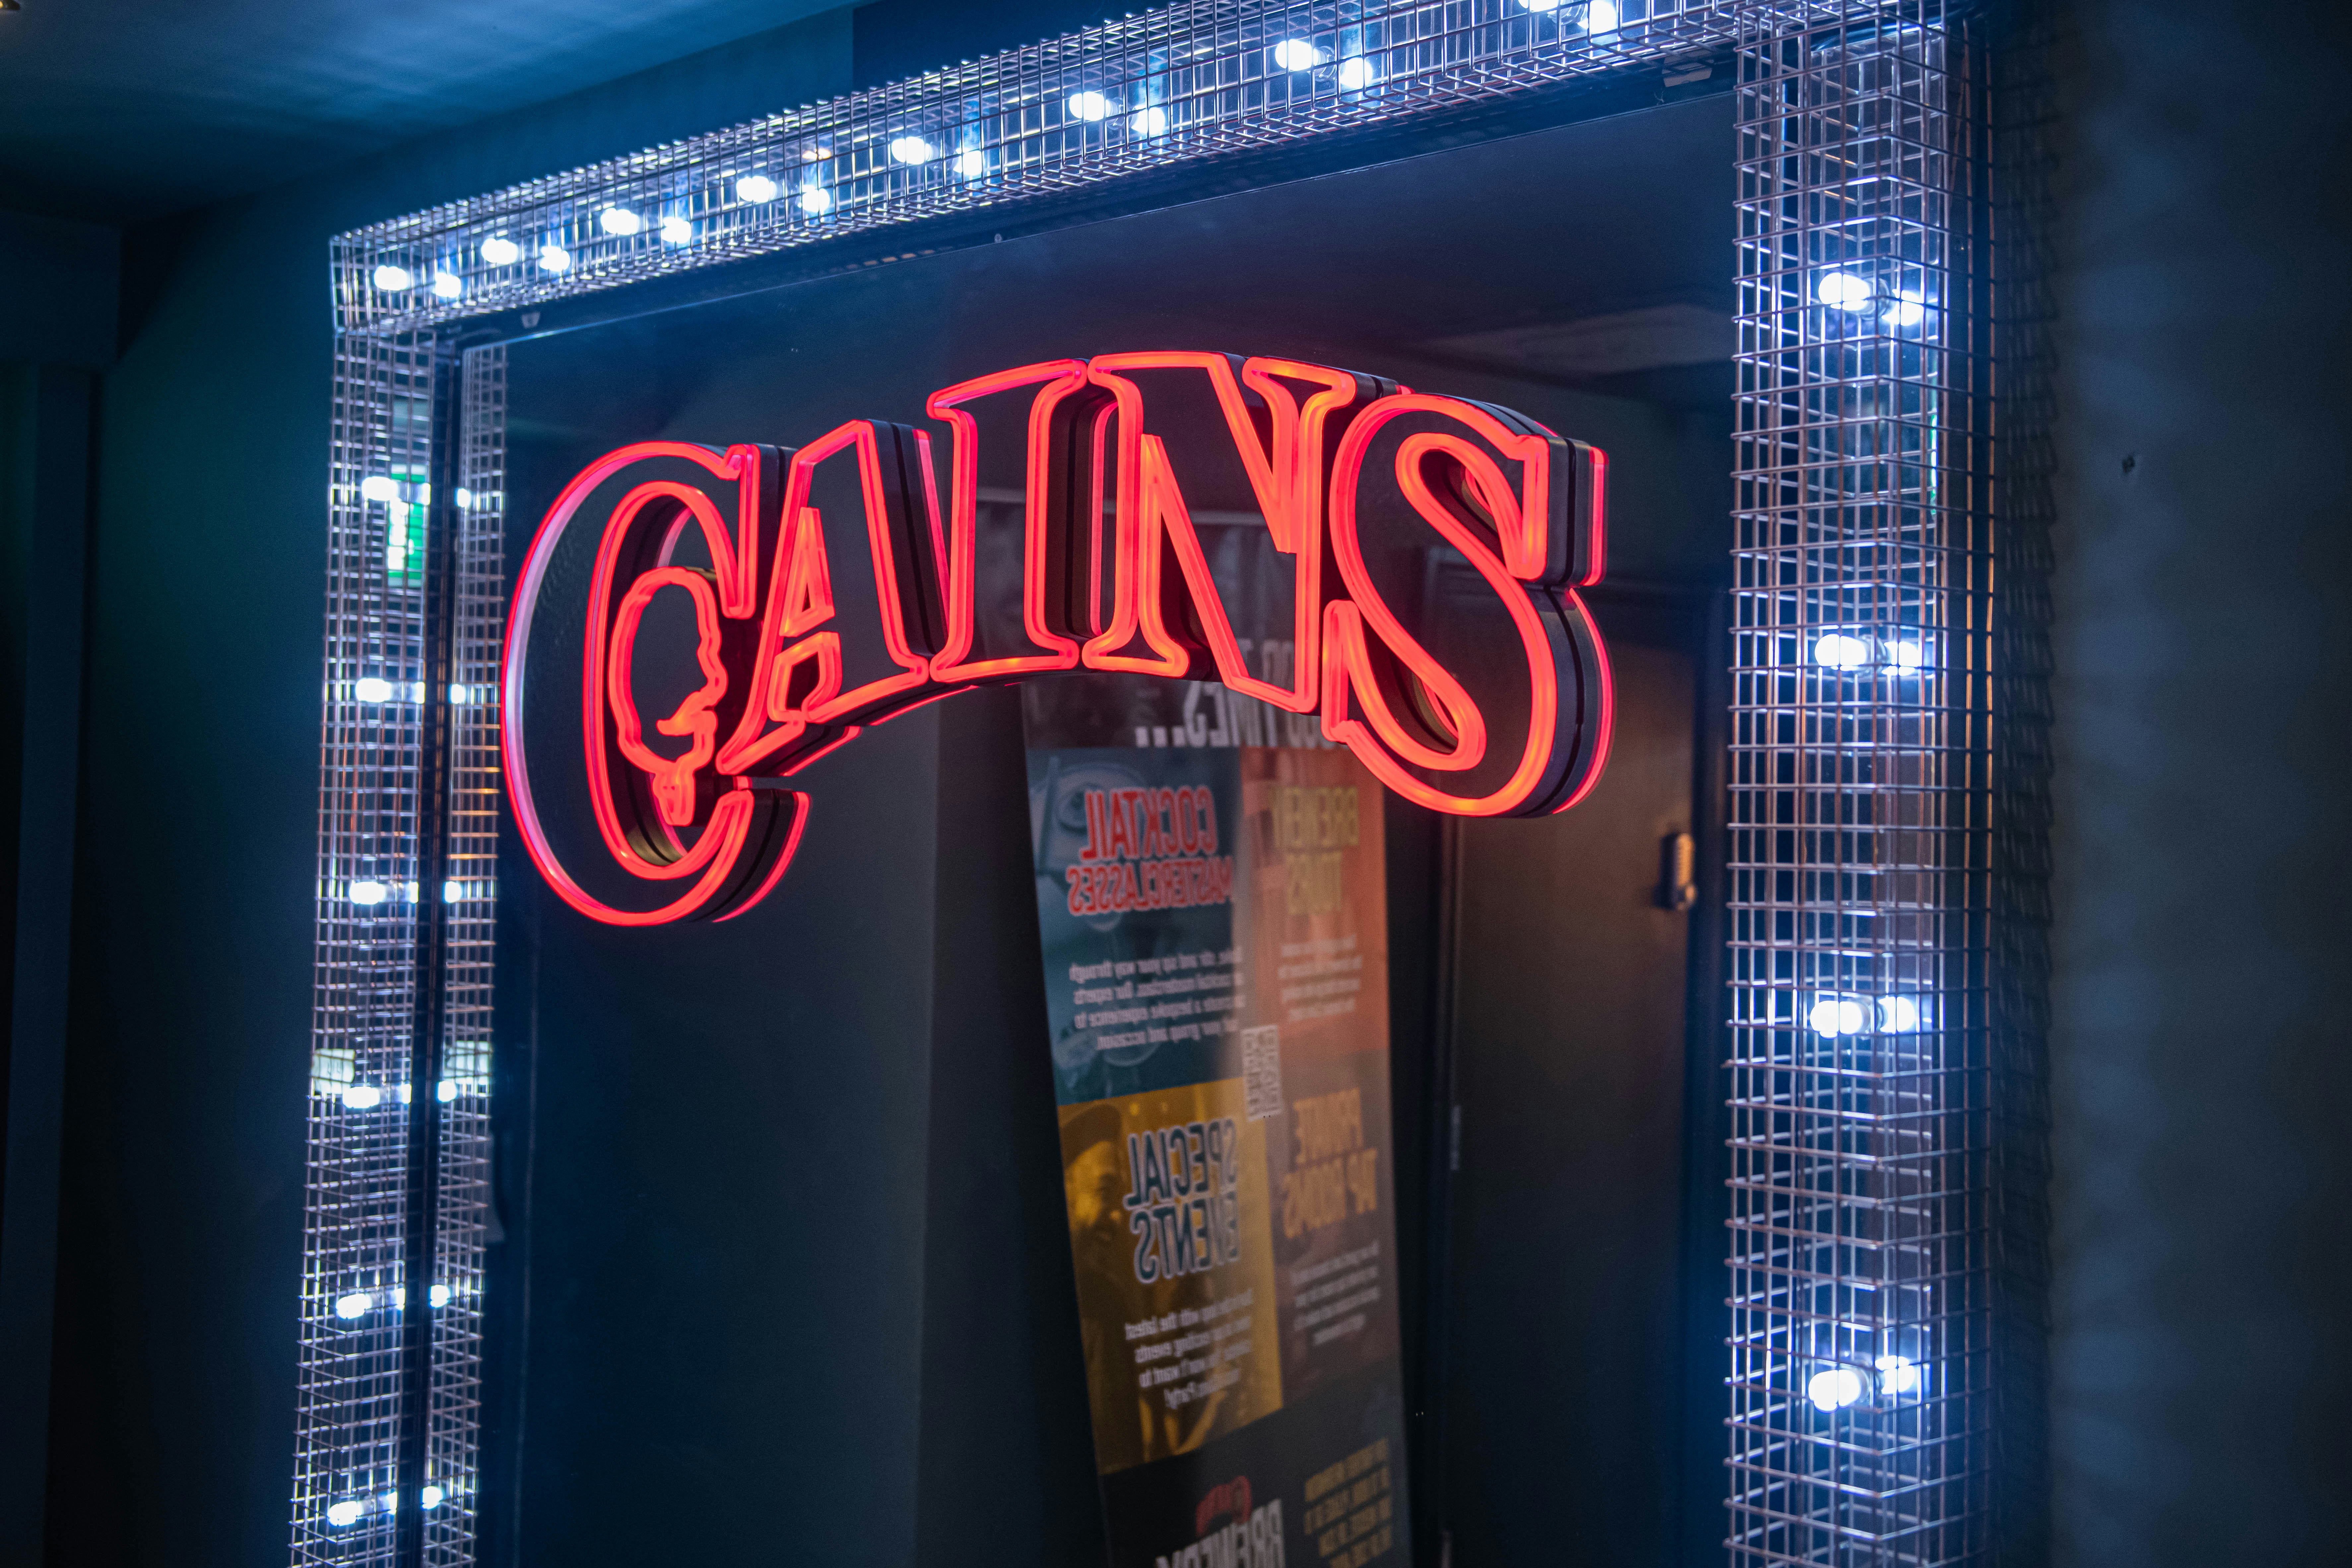 Cains Brewery - The Library image 2